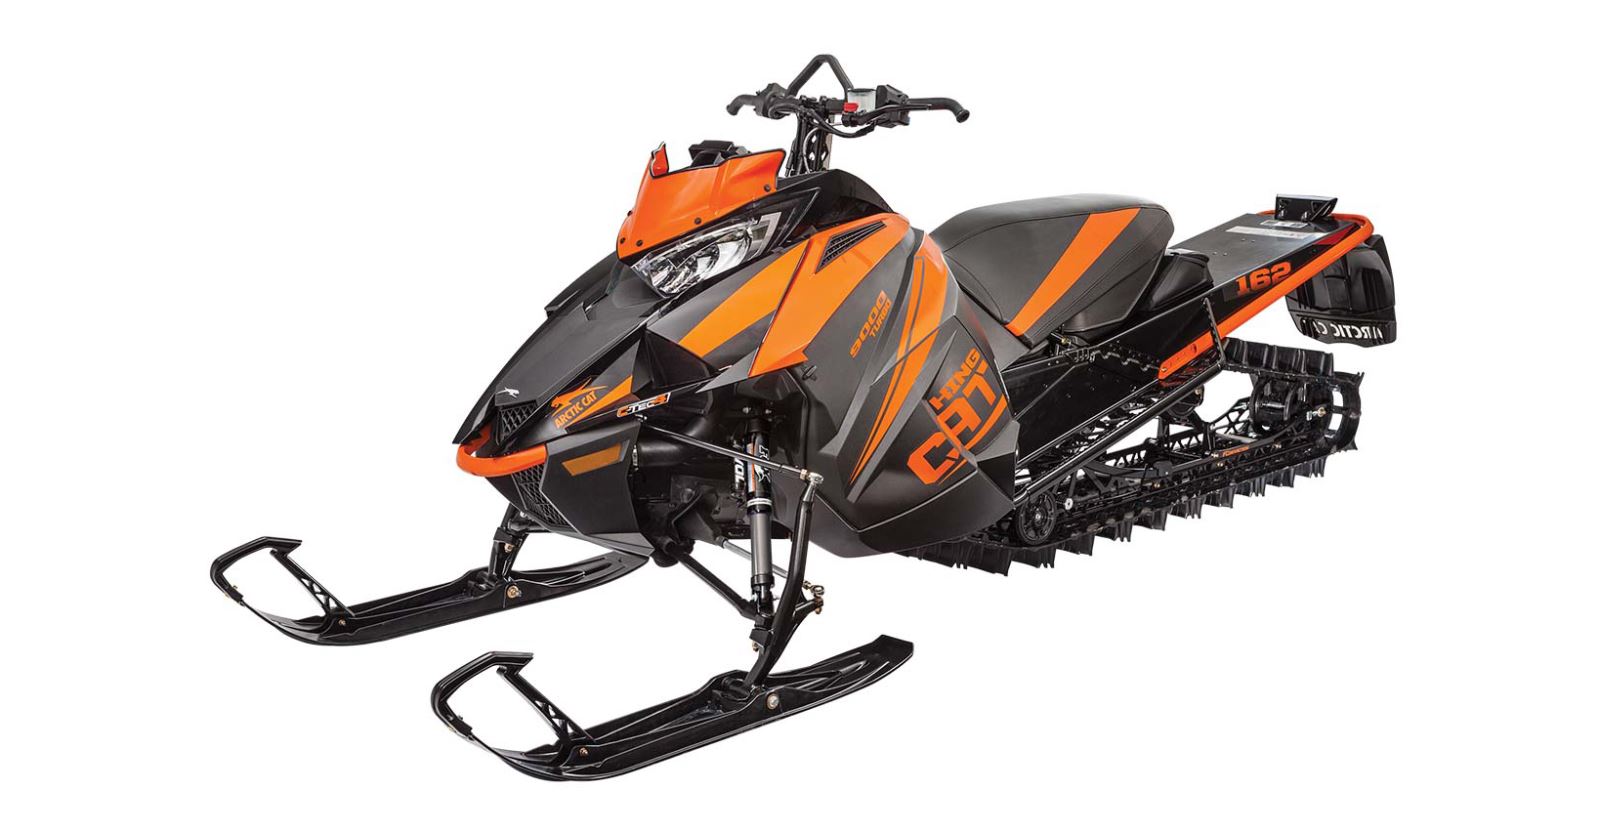 2018 Arctic Cat: Entire M Series Lineup Gets Updated | SnoWest 